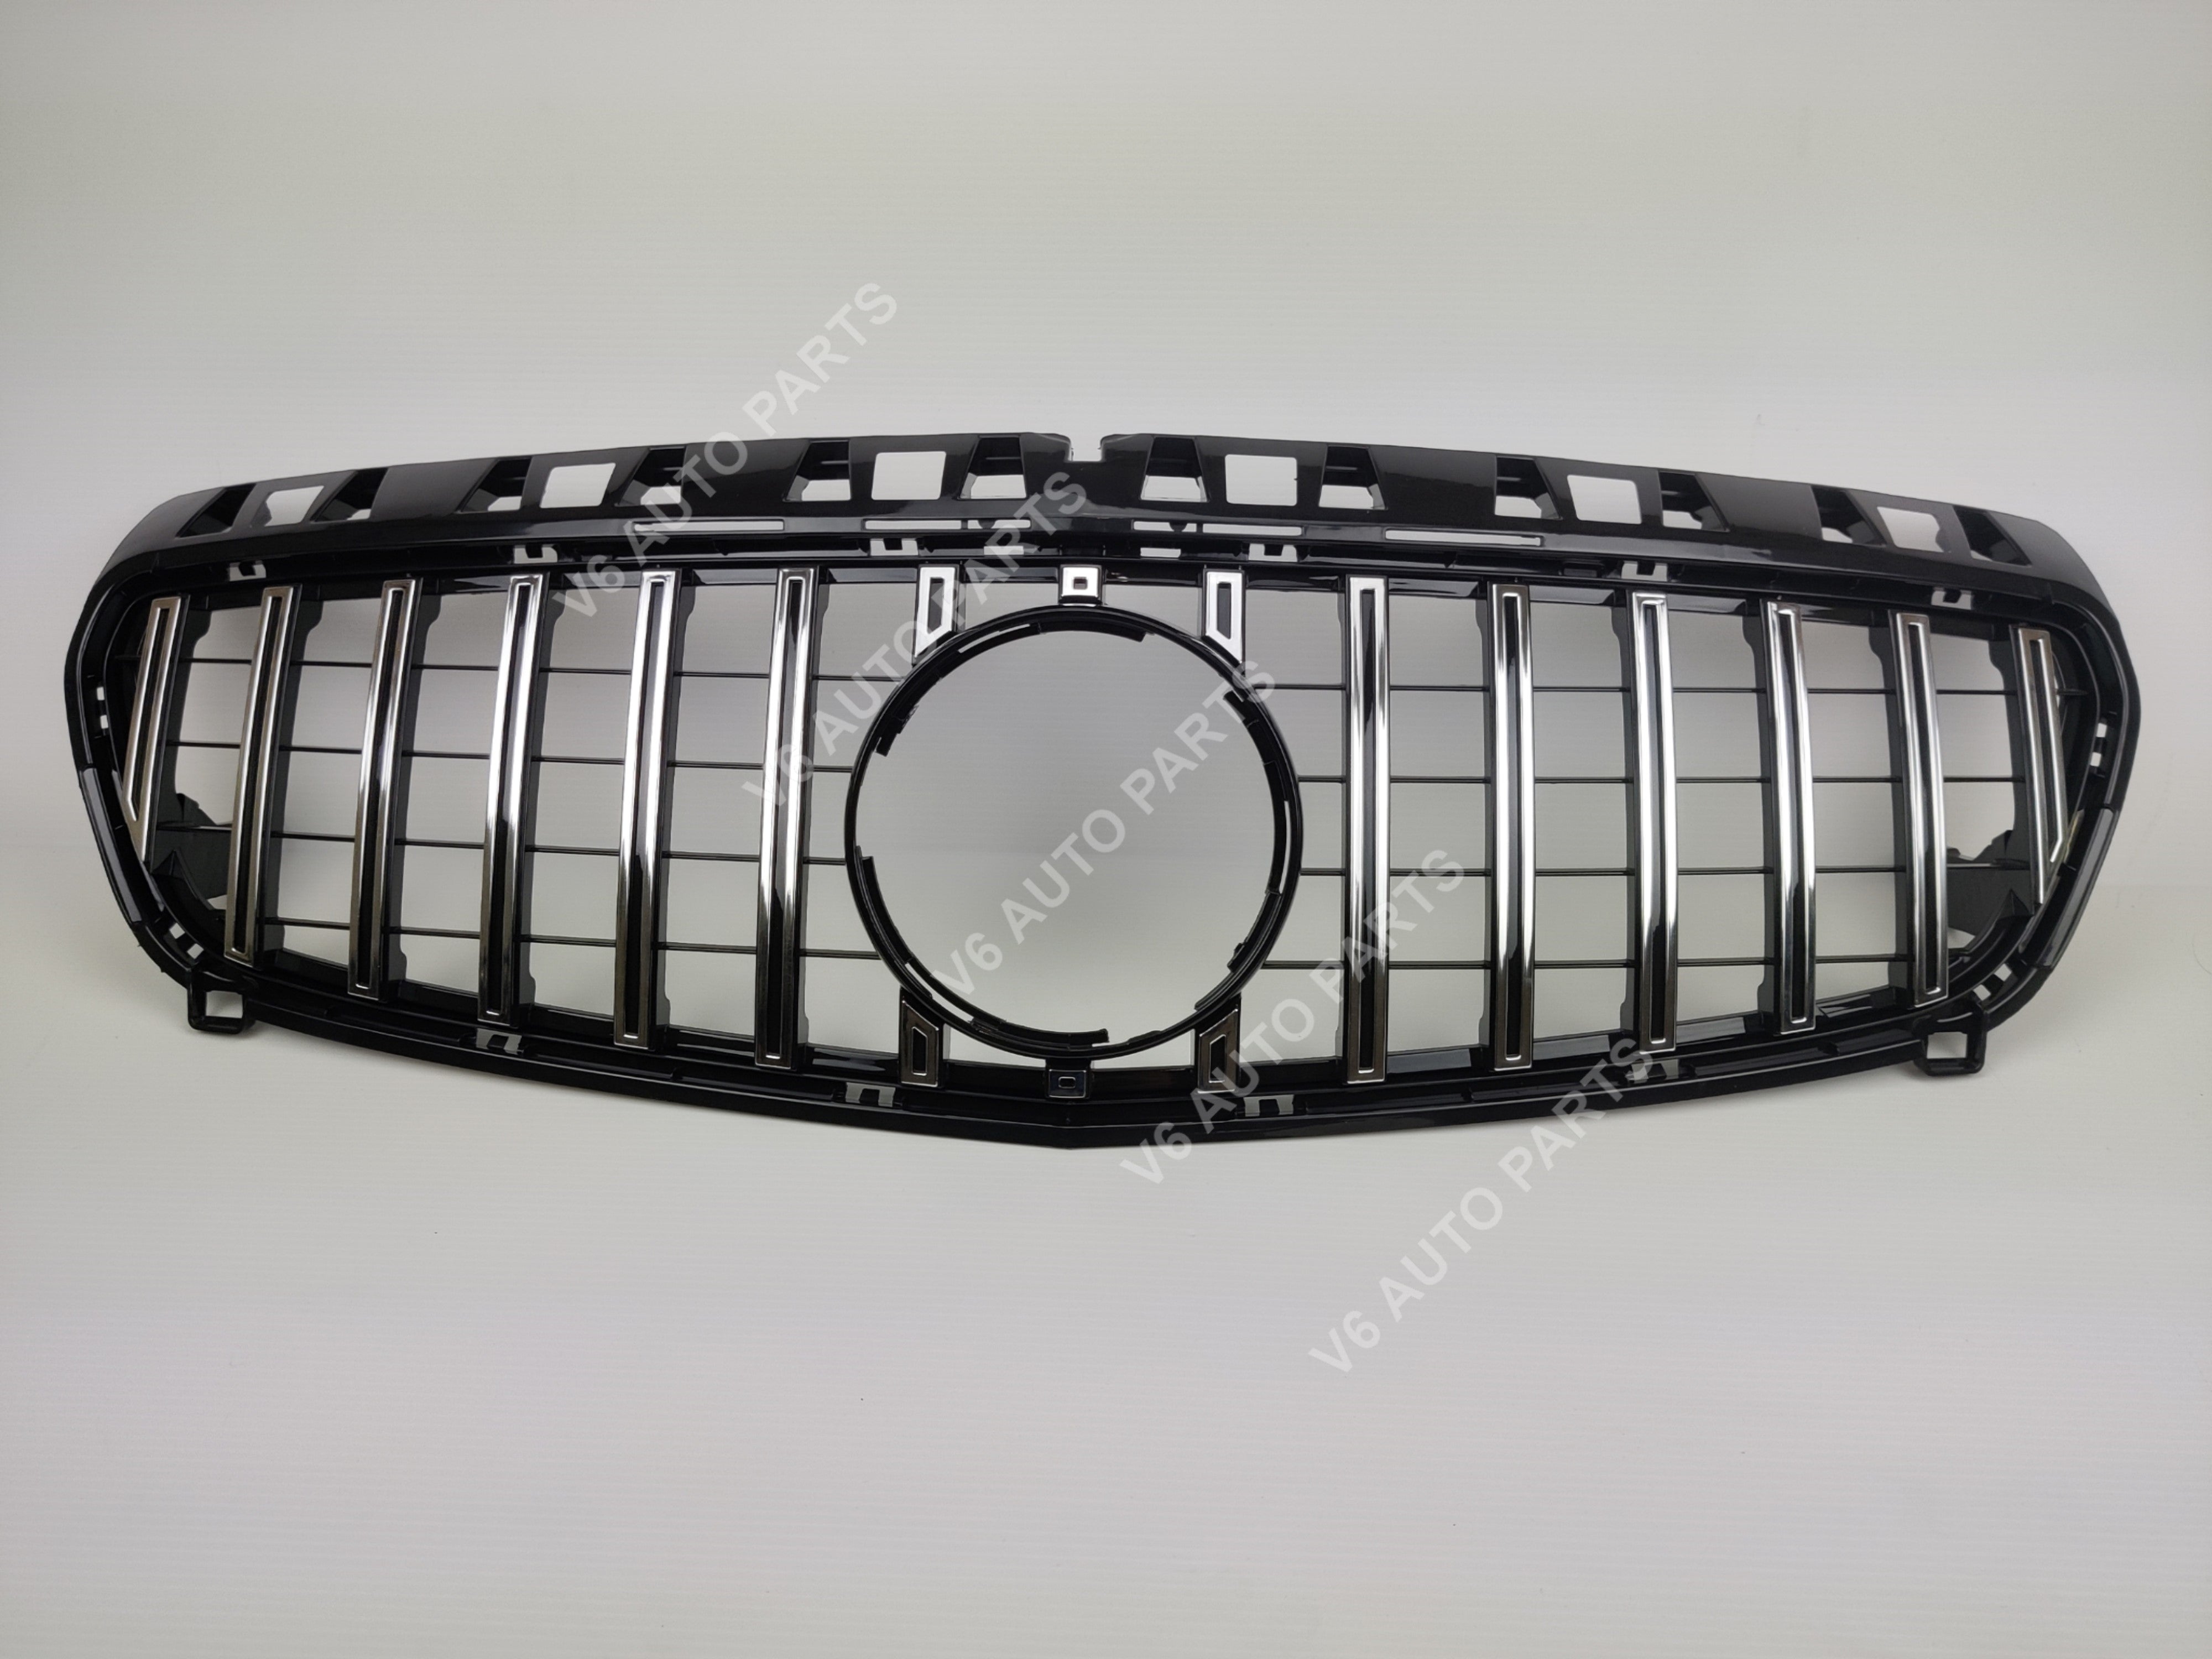 For Mercedes A-Class A176 A180 A45 A160 Front Bumper GT Grille 2012 - 2015 AMG